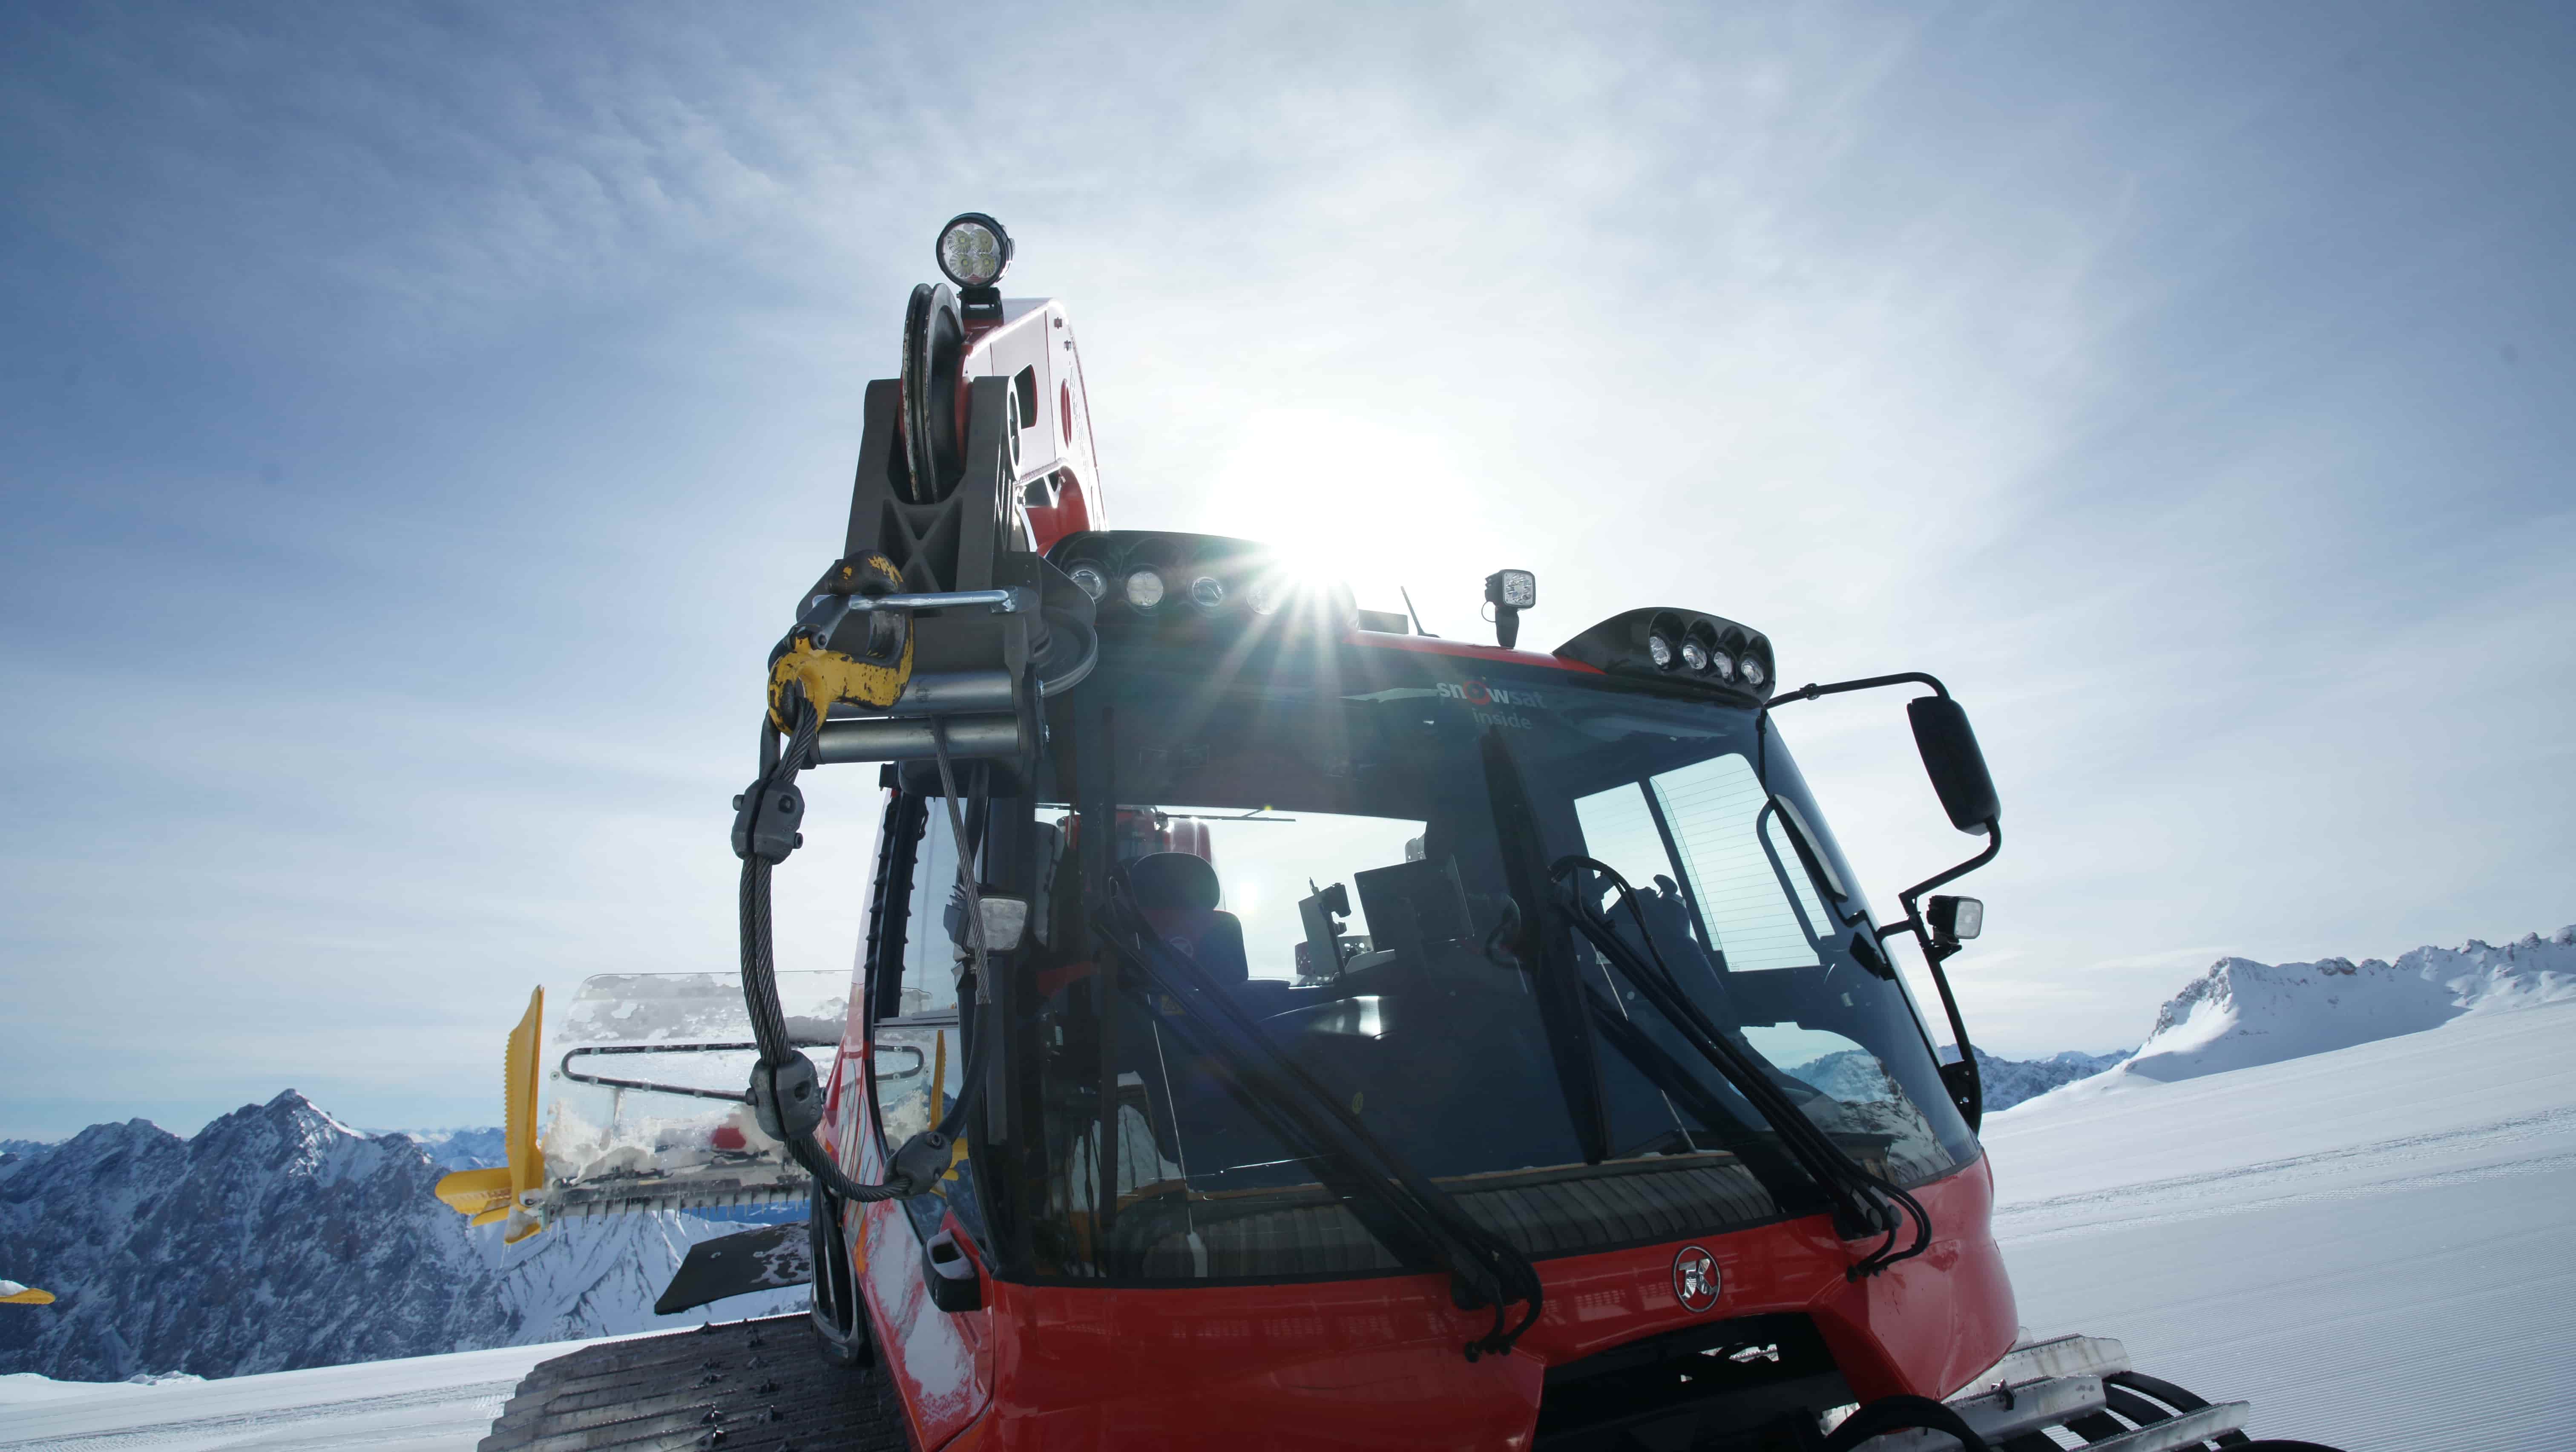 The PRO ACADEMY beginner training courses are the first step on the way to your dream job as a snow groomer driver!